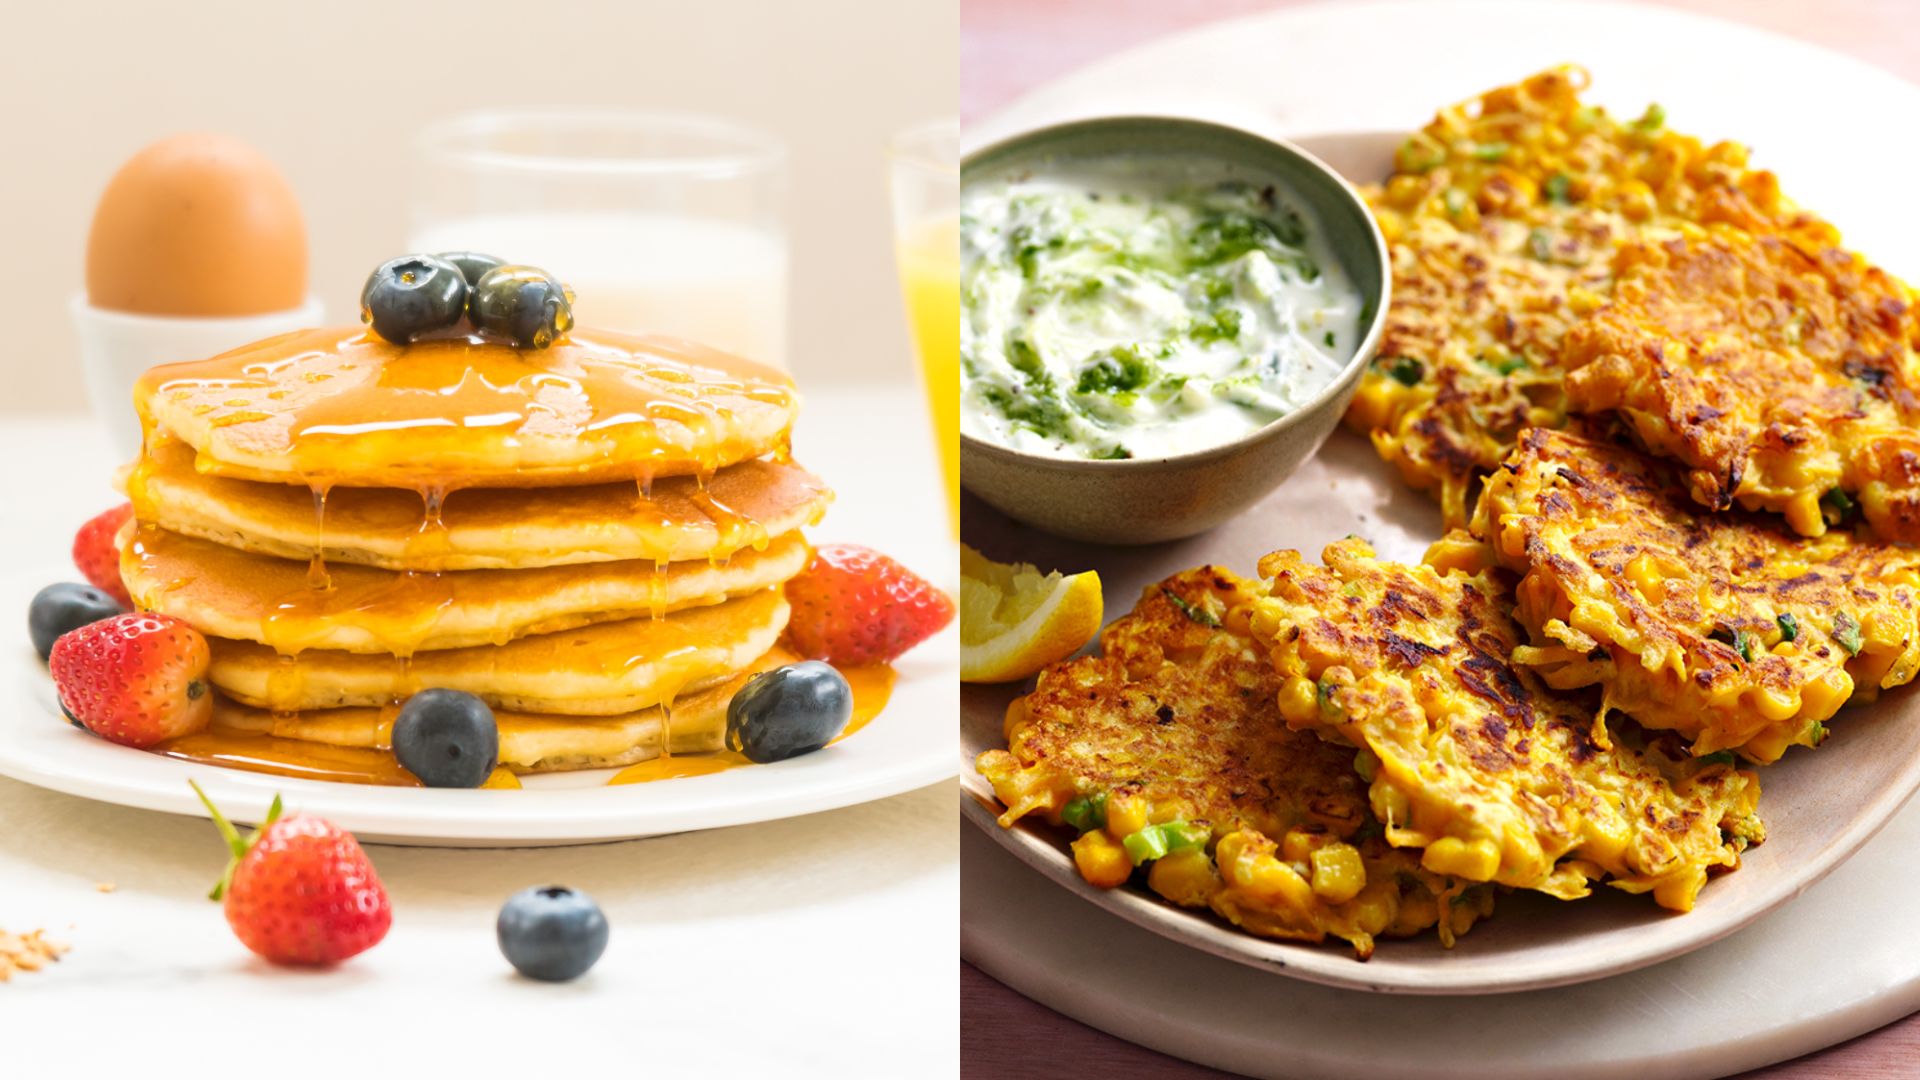 7 Easy & Healthy Recipes You Can Try With Your Kids